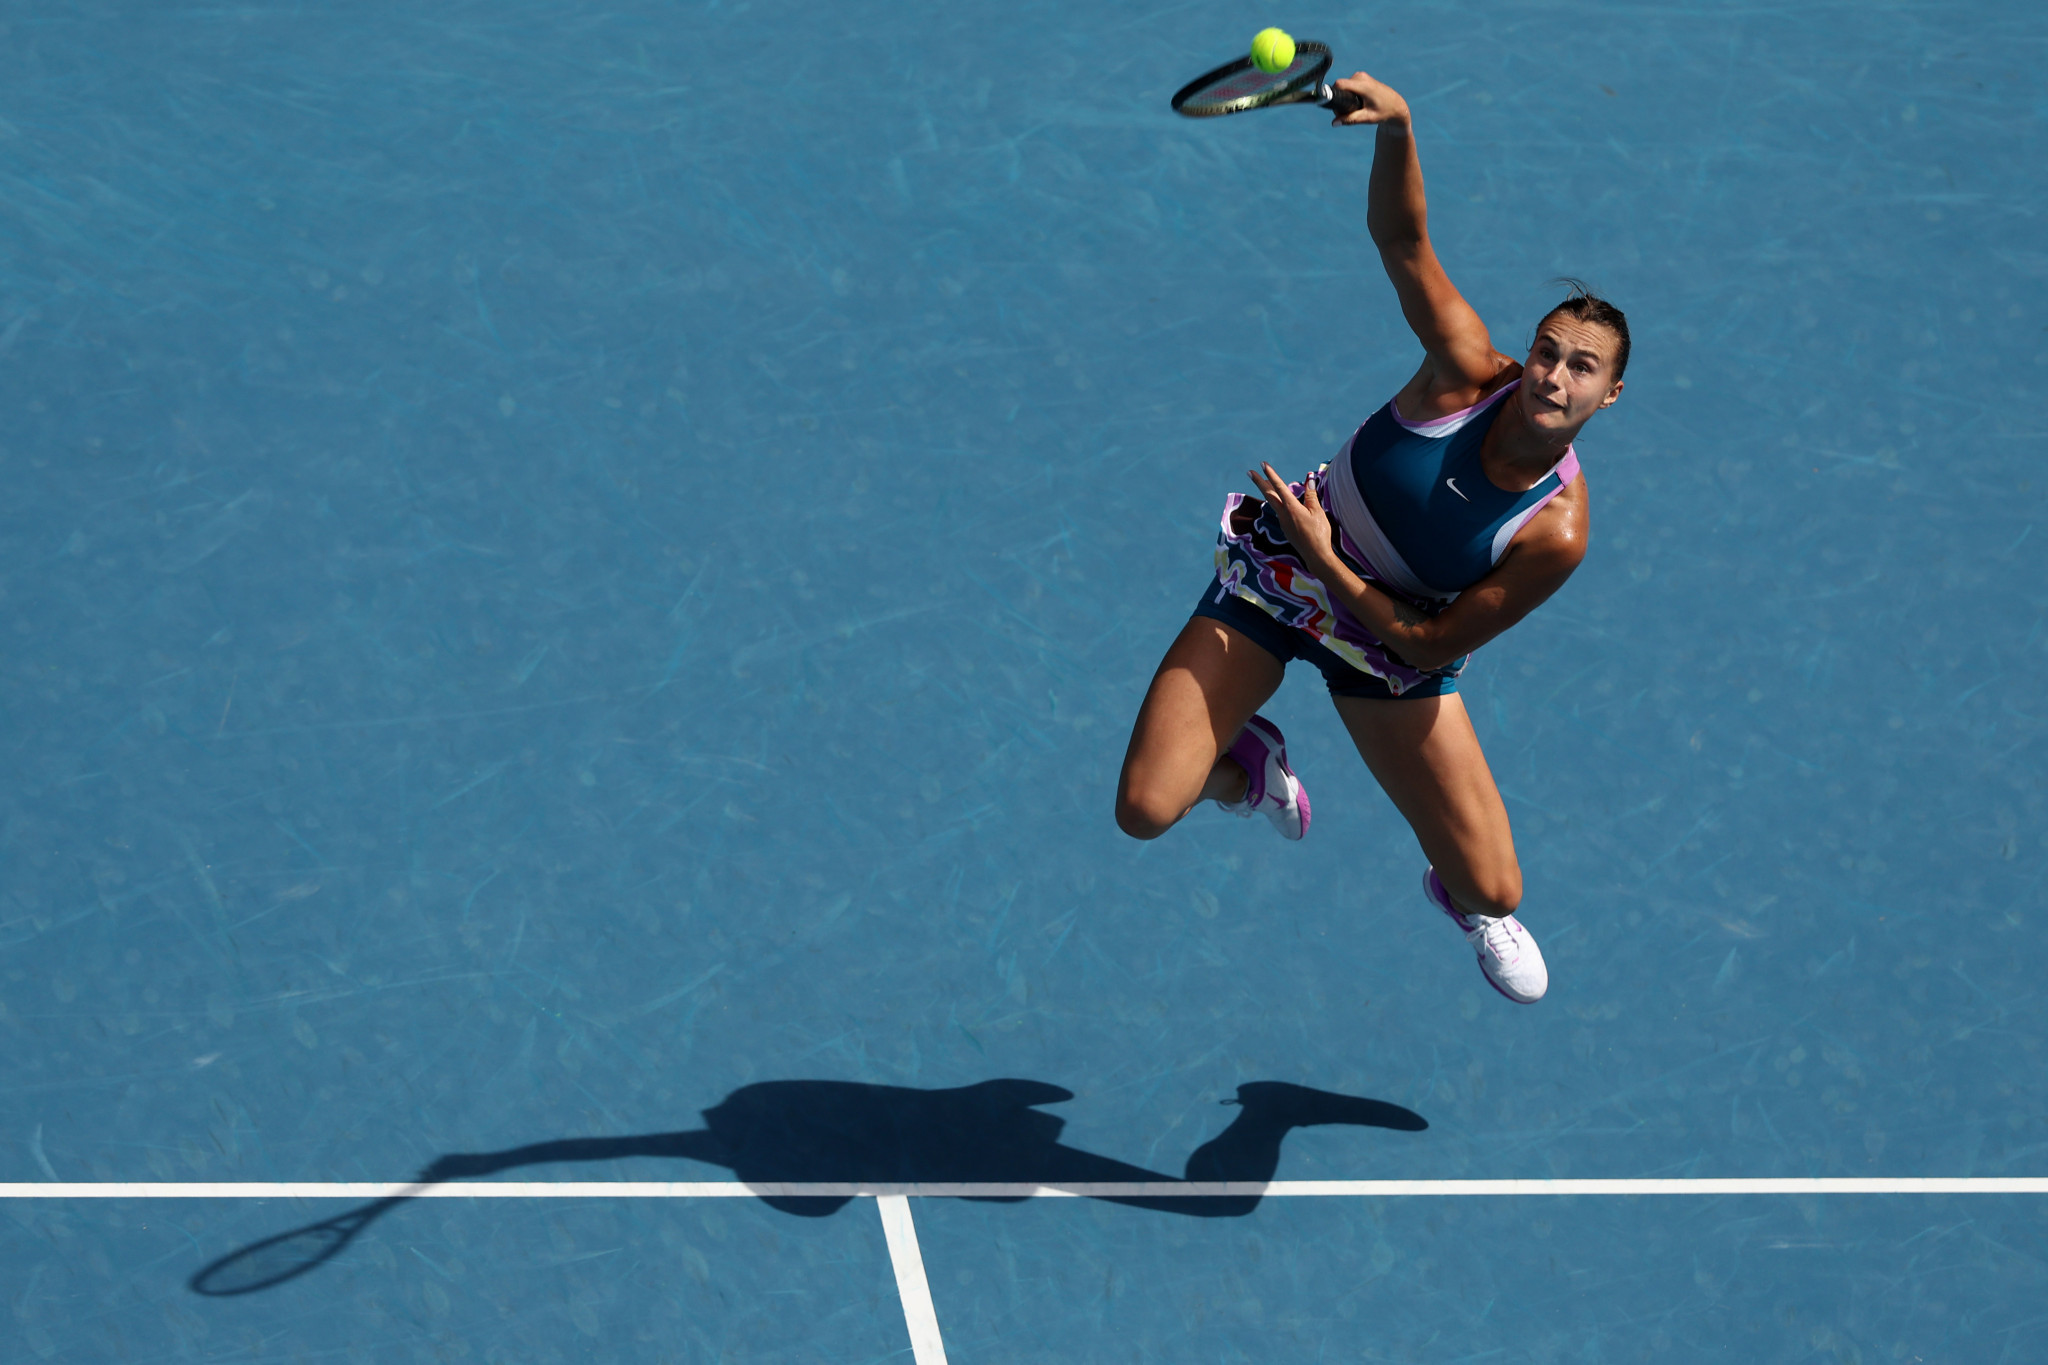 Women's champion Aryna Sabalenka has returned to her career-high position of second in the world rankings ©Getty Images